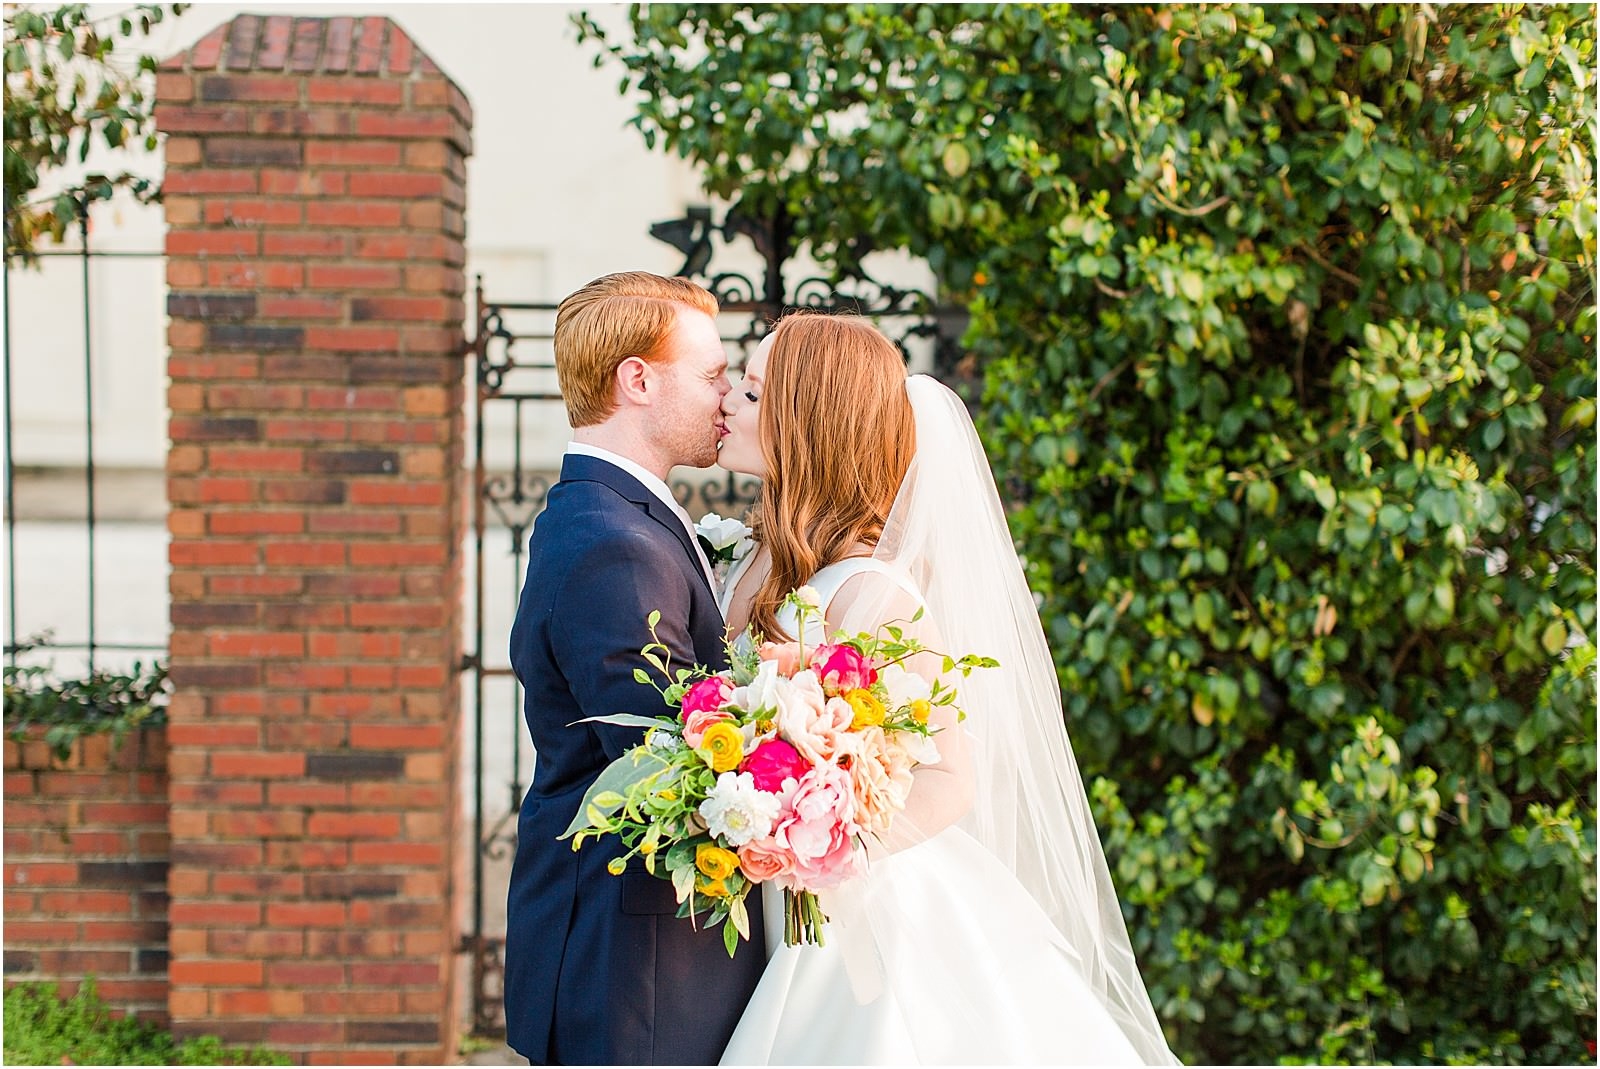 A Perfectly Intimate Wedding in Downtown Evansville Indiana | Jennah and Steve | Bret and Brandie Photography | | 0101.jpg